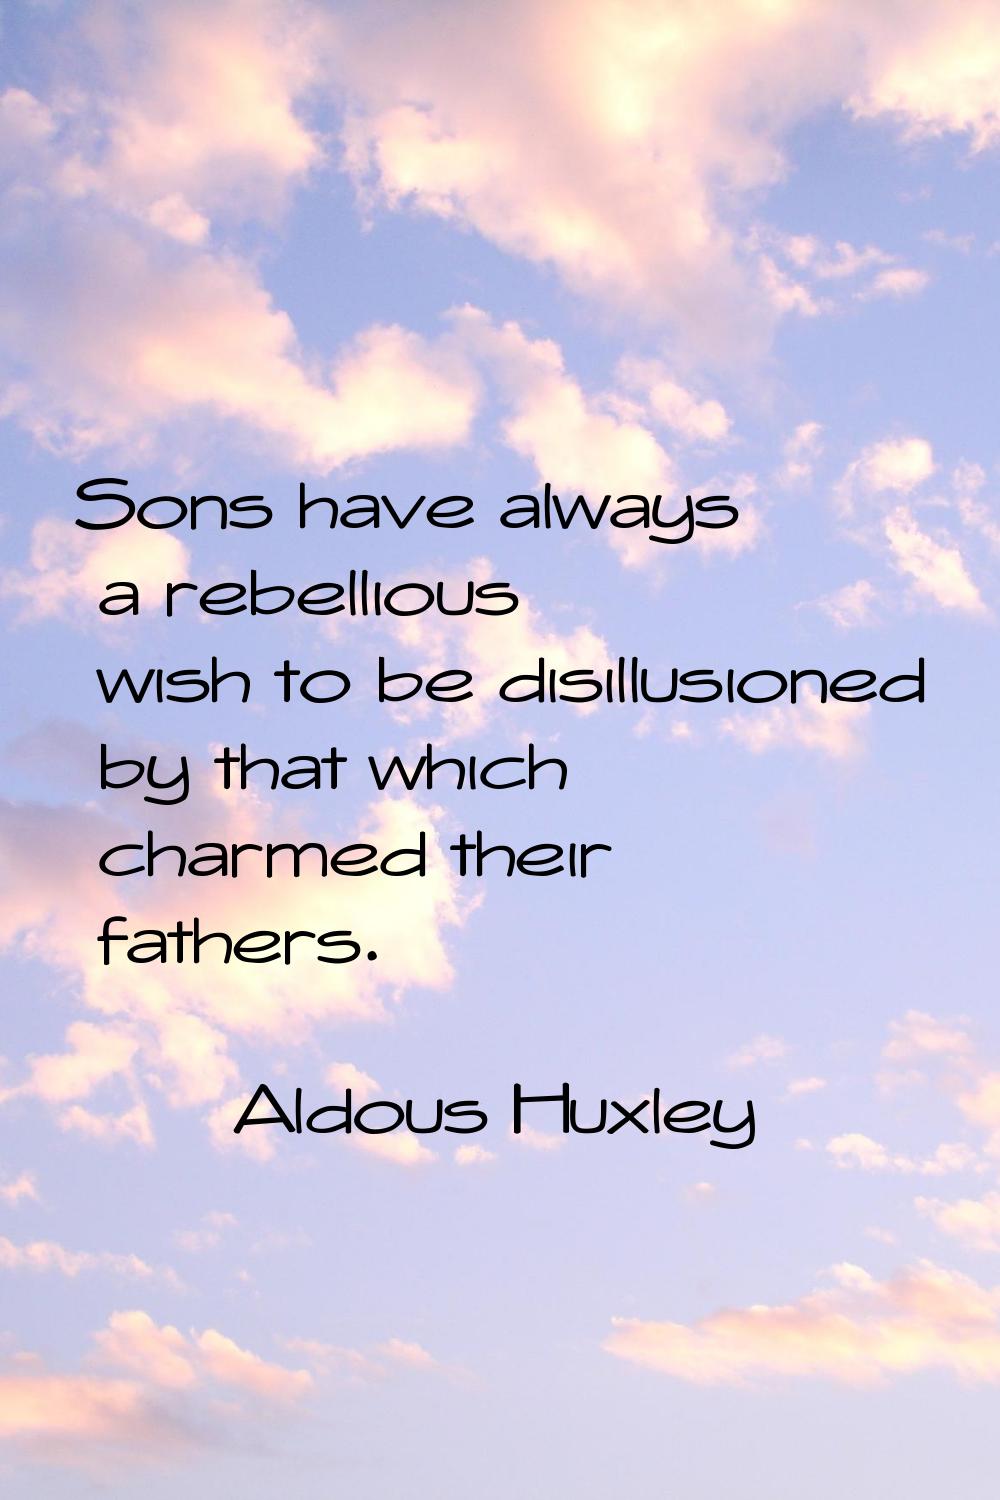 Sons have always a rebellious wish to be disillusioned by that which charmed their fathers.